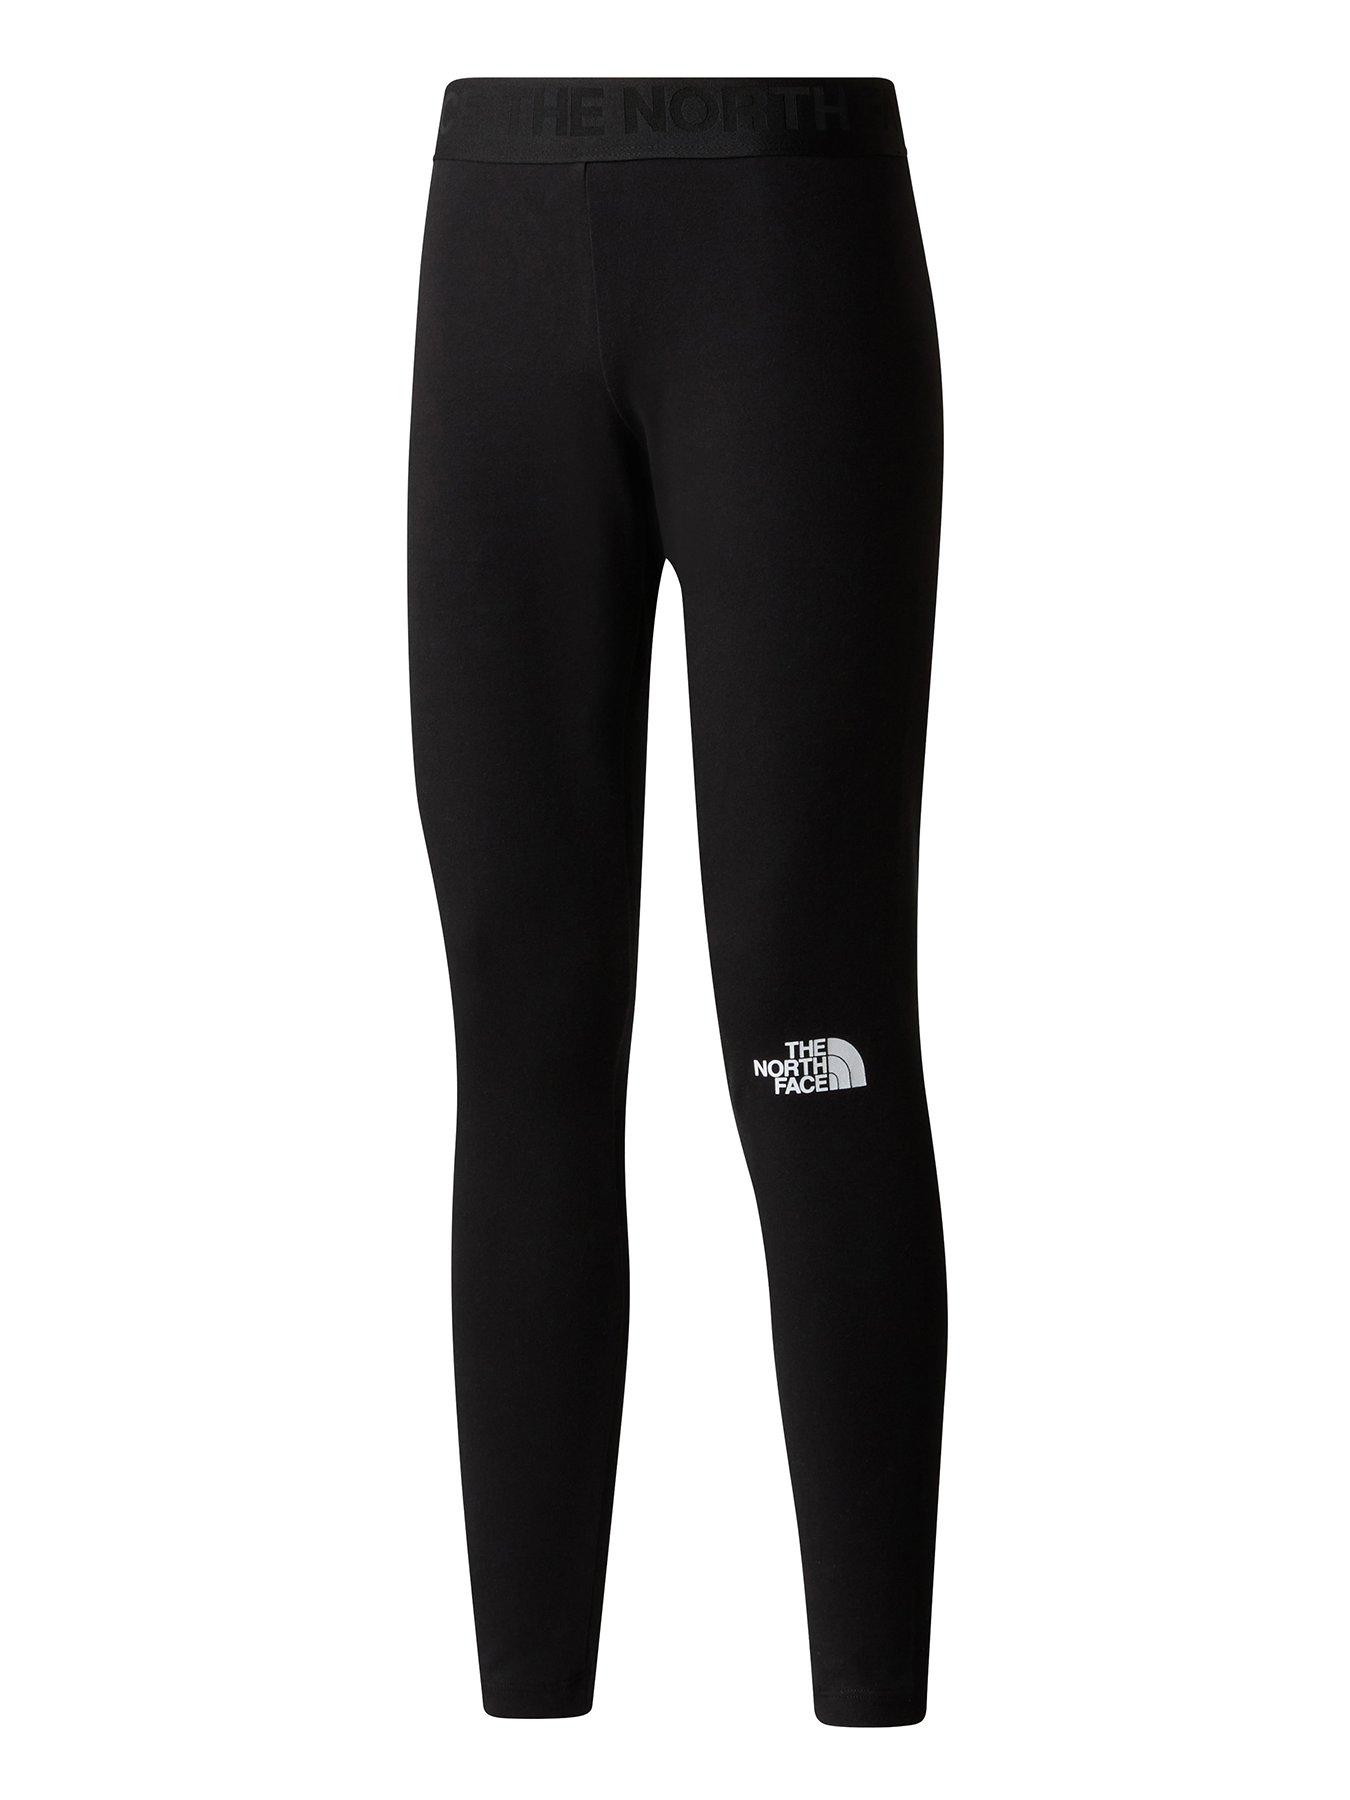 THE NORTH FACE Girls Everyday Leggings - Black, Black, Size S=7-8 Years